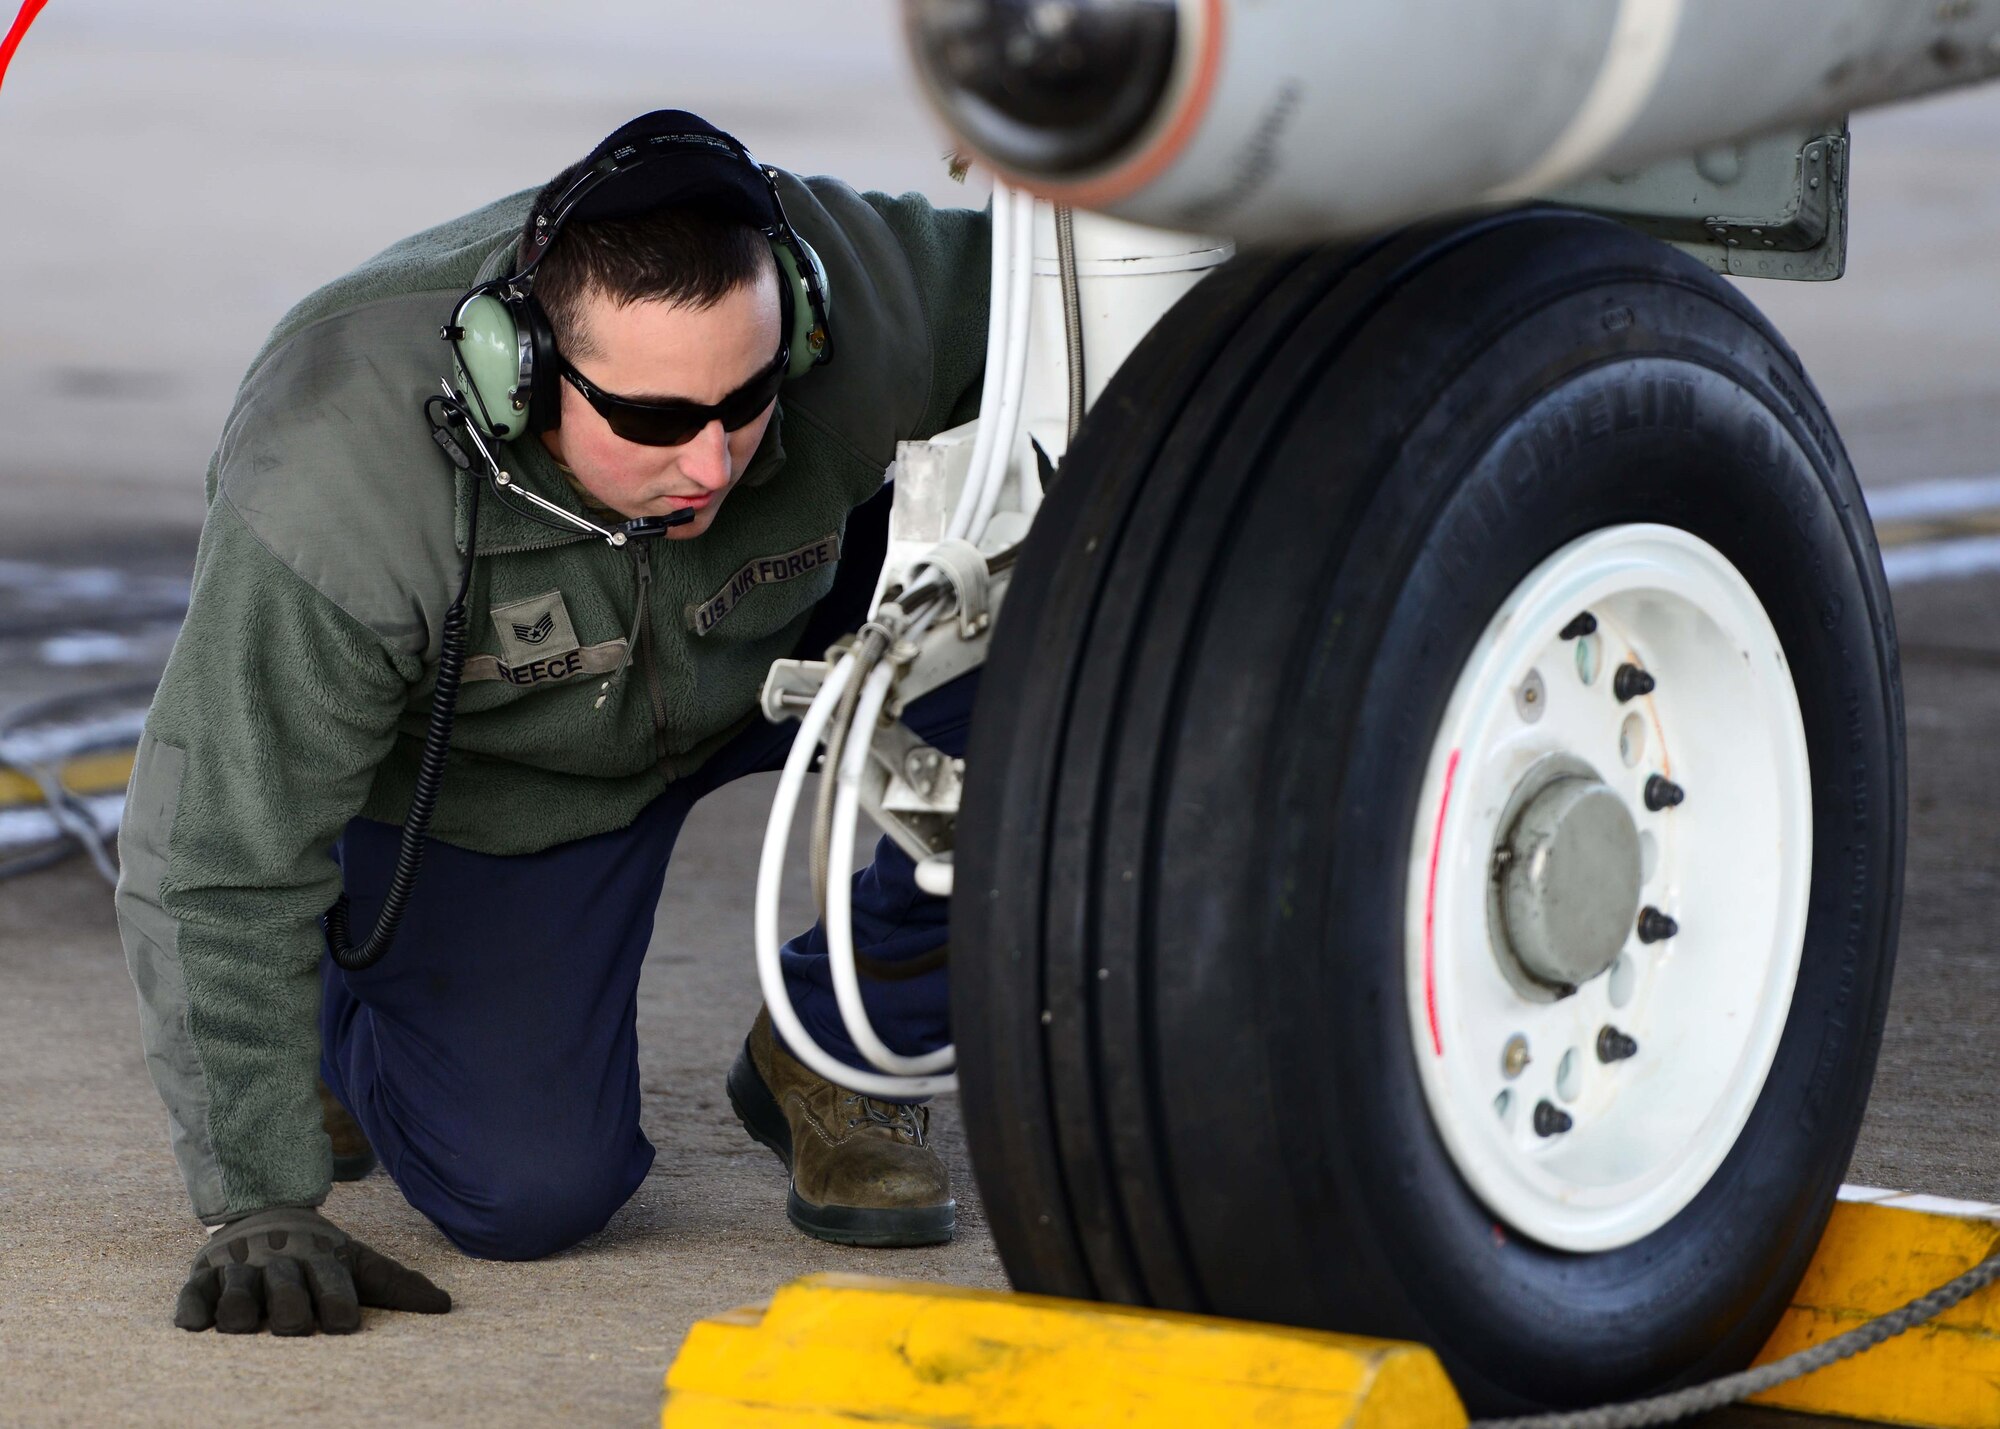 U.S. Air Force Staff Sgt. Terry Reece, a crew chief assigned to the 358th Fighter Squadron, visually inspects tires during pre-flight checks prior to a local training mission at Whiteman Air Force Base, Mo., Feb. 14, 2017. The A-10 Thunderbolt II has excellent maneuverability at low air speeds and altitude, and is a highly accurate and survivable weapons-delivery platform. The aircraft can loiter near battle areas for extended periods of time and operate in low ceiling and visibility conditions. The wide combat radius and short takeoff and landing capability permit operations in and out of locations near front lines. Using night vision goggles, A-10 pilots can conduct their missions during darkness.
